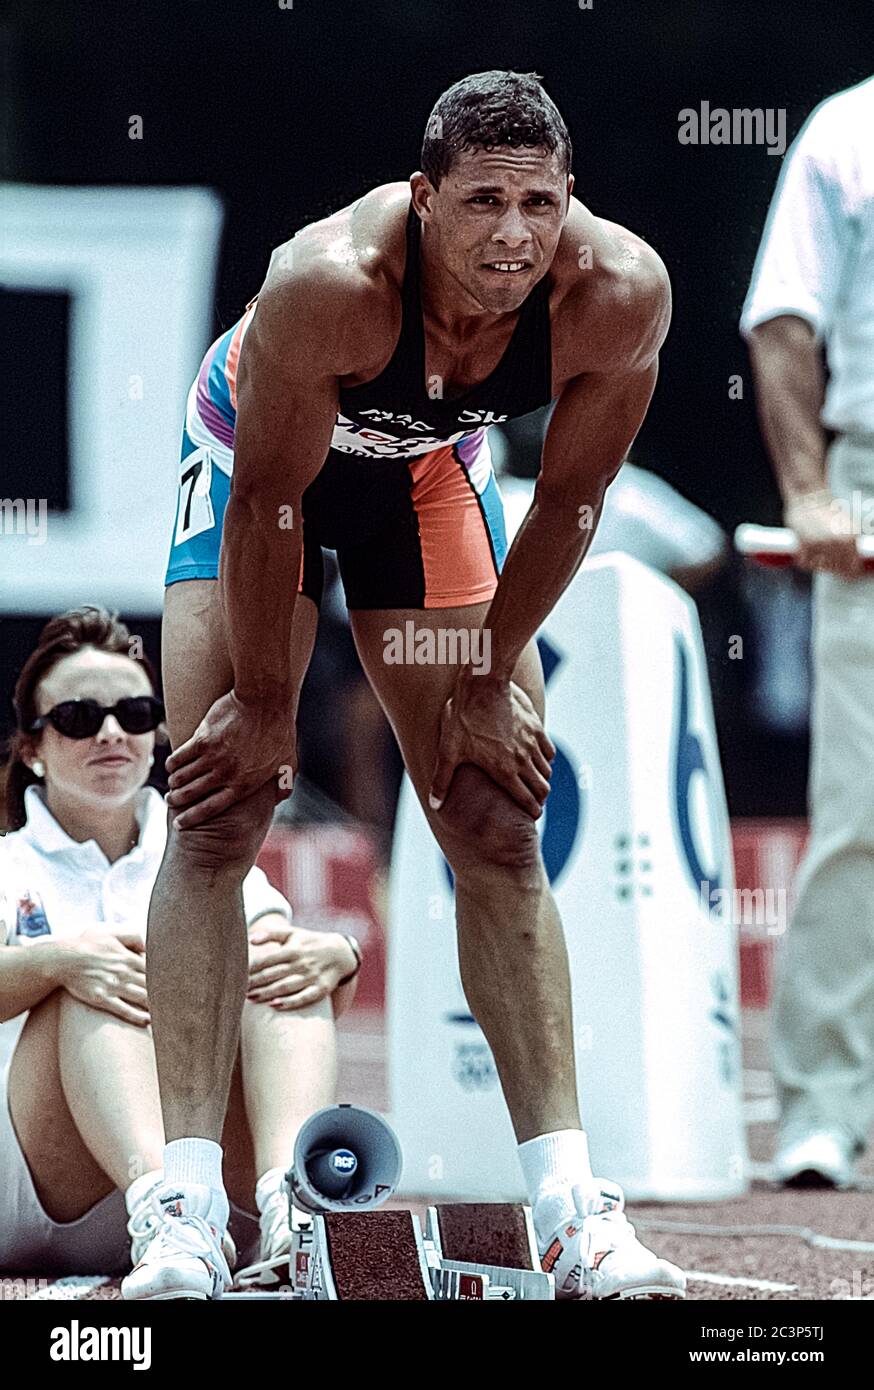 Dan O'Brien (USA) competing in the  decathlon at the 1992 US Olympic Track and Field Team Trials Stock Photo